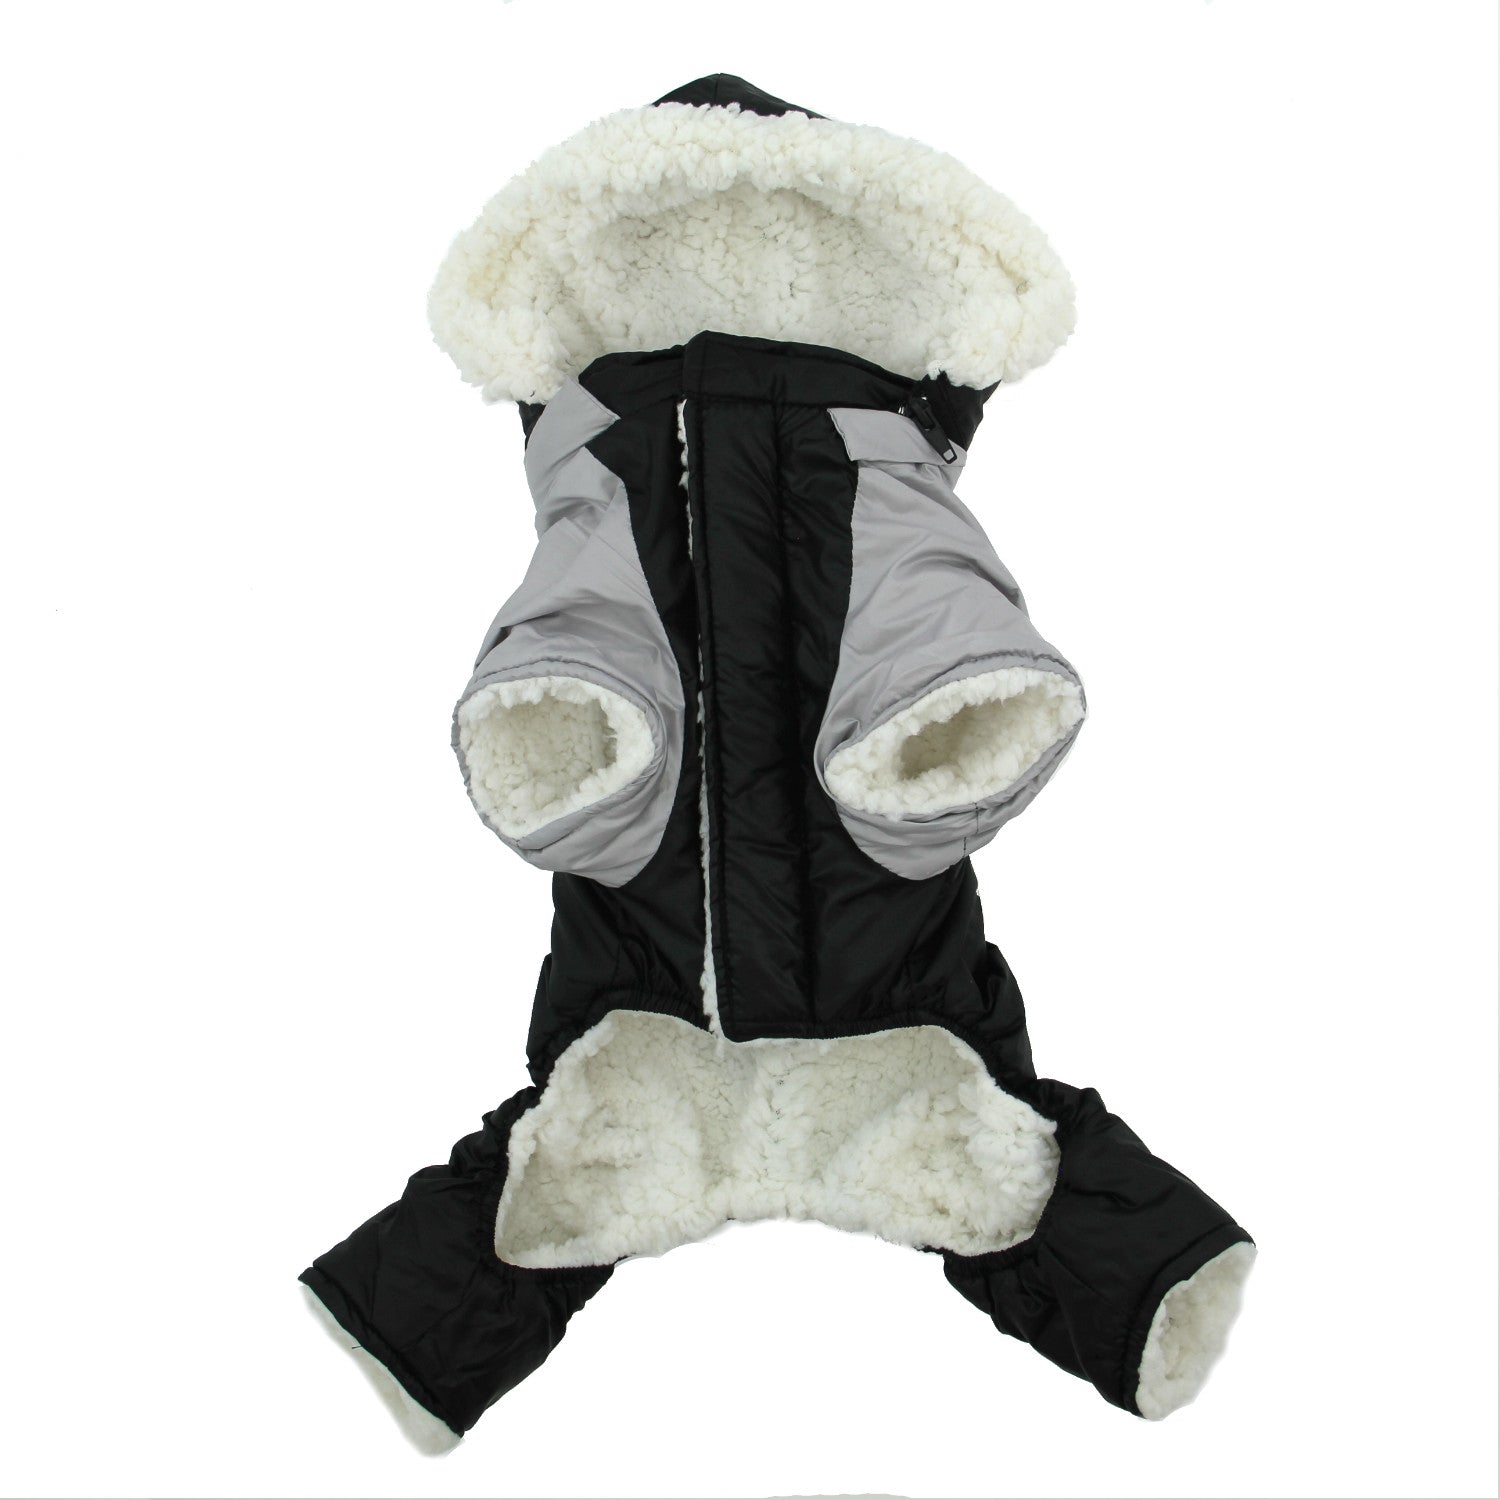 Ruffin It Dog Snowsuit Harness - Black and Gray